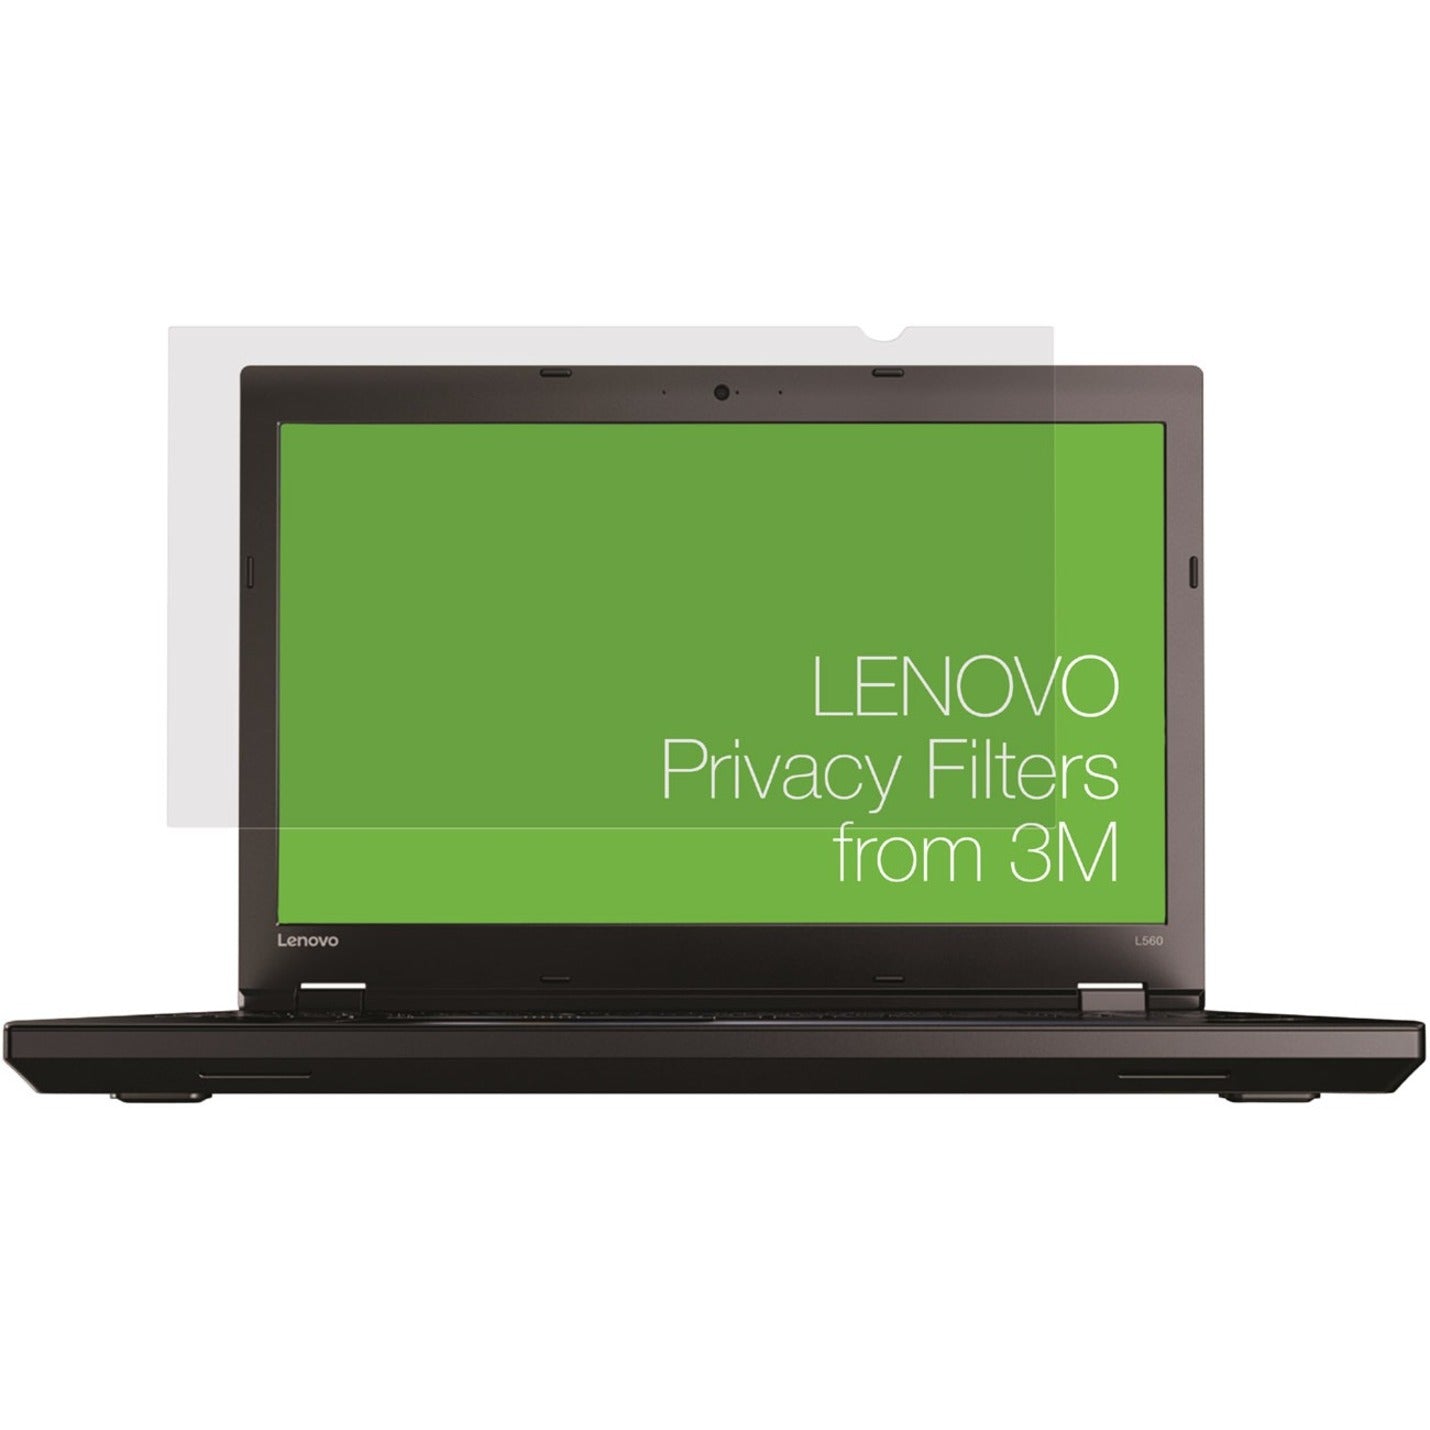 Lenovo 0A61769 14.0-inch W9 Laptop Privacy Filter from 3M Black, Reversible, Easy to Apply, Easy to Remove, Privacy Screen Filter